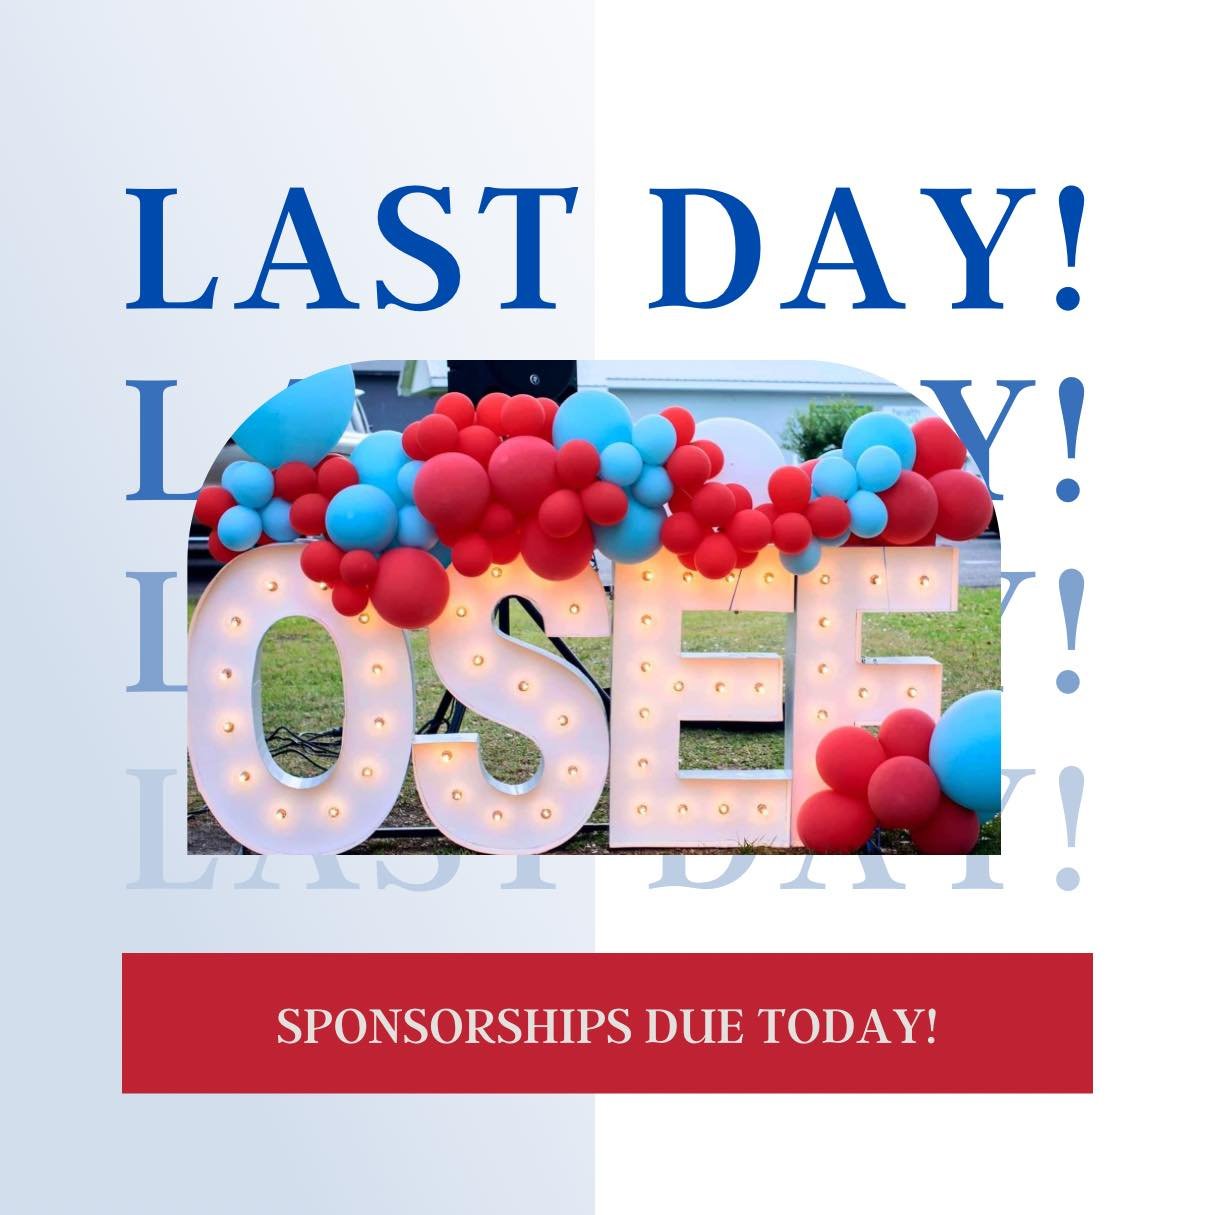 ✨ Today is the LAST DAY to become part of our fundraiser via Sponsorship!!! ✨

Help us put on the BEST Crawfish &amp; Cornhole event ever!!! 

https://www.oseducationfoundation.com/cc-sponsorships

💙🦞💙🦞💙🦞💙